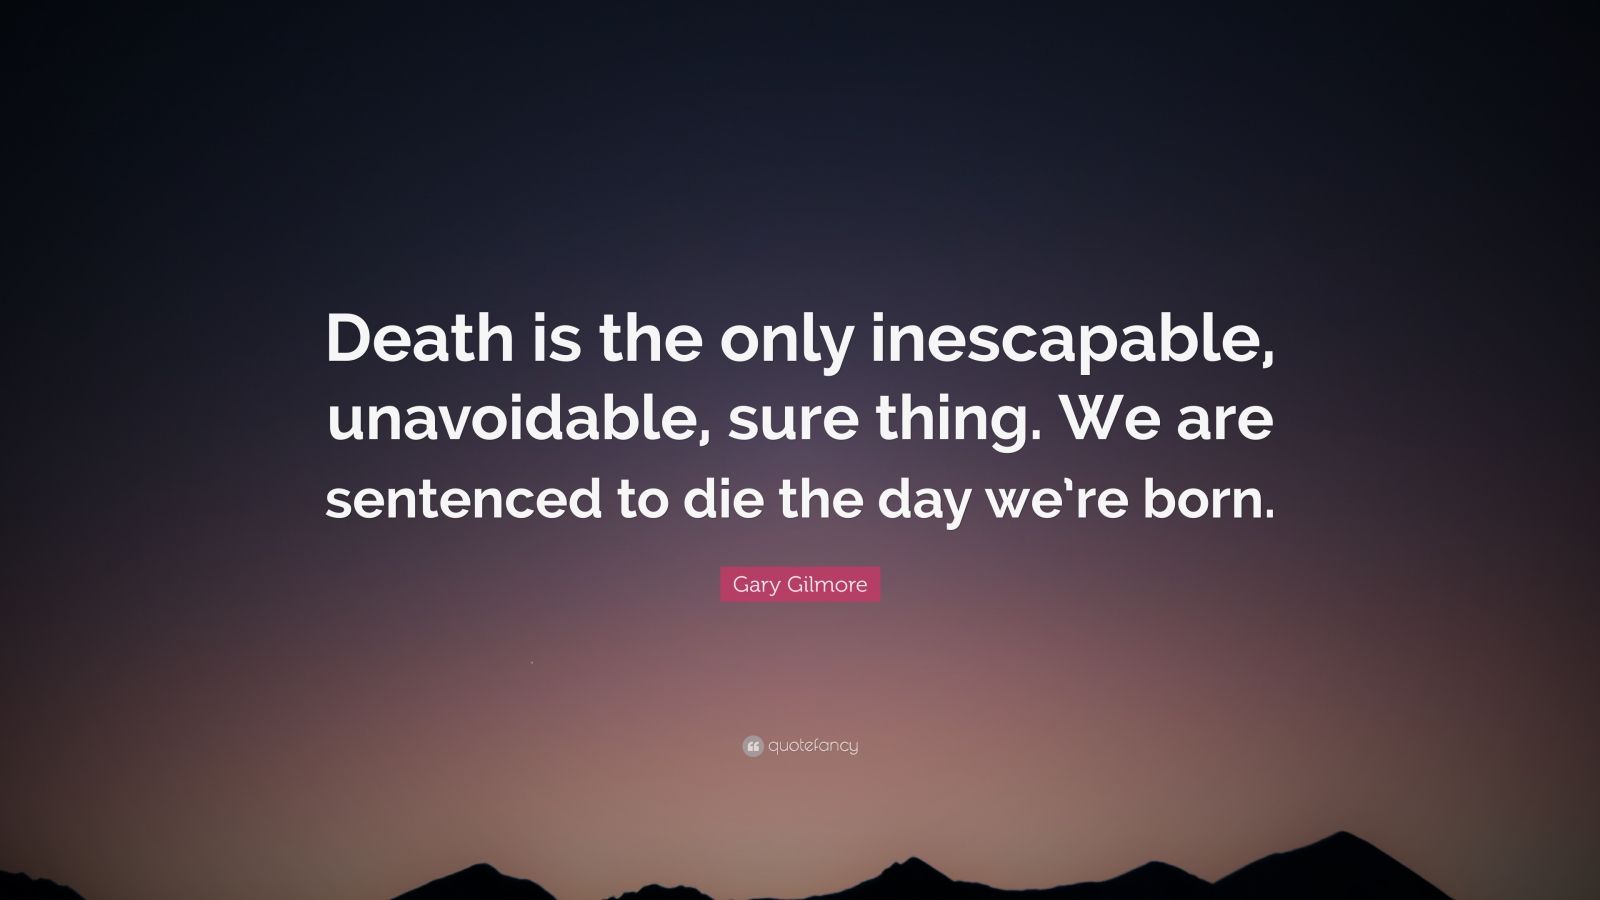 Gary Gilmore Quote: “Death is the only inescapable, unavoidable, sure ...